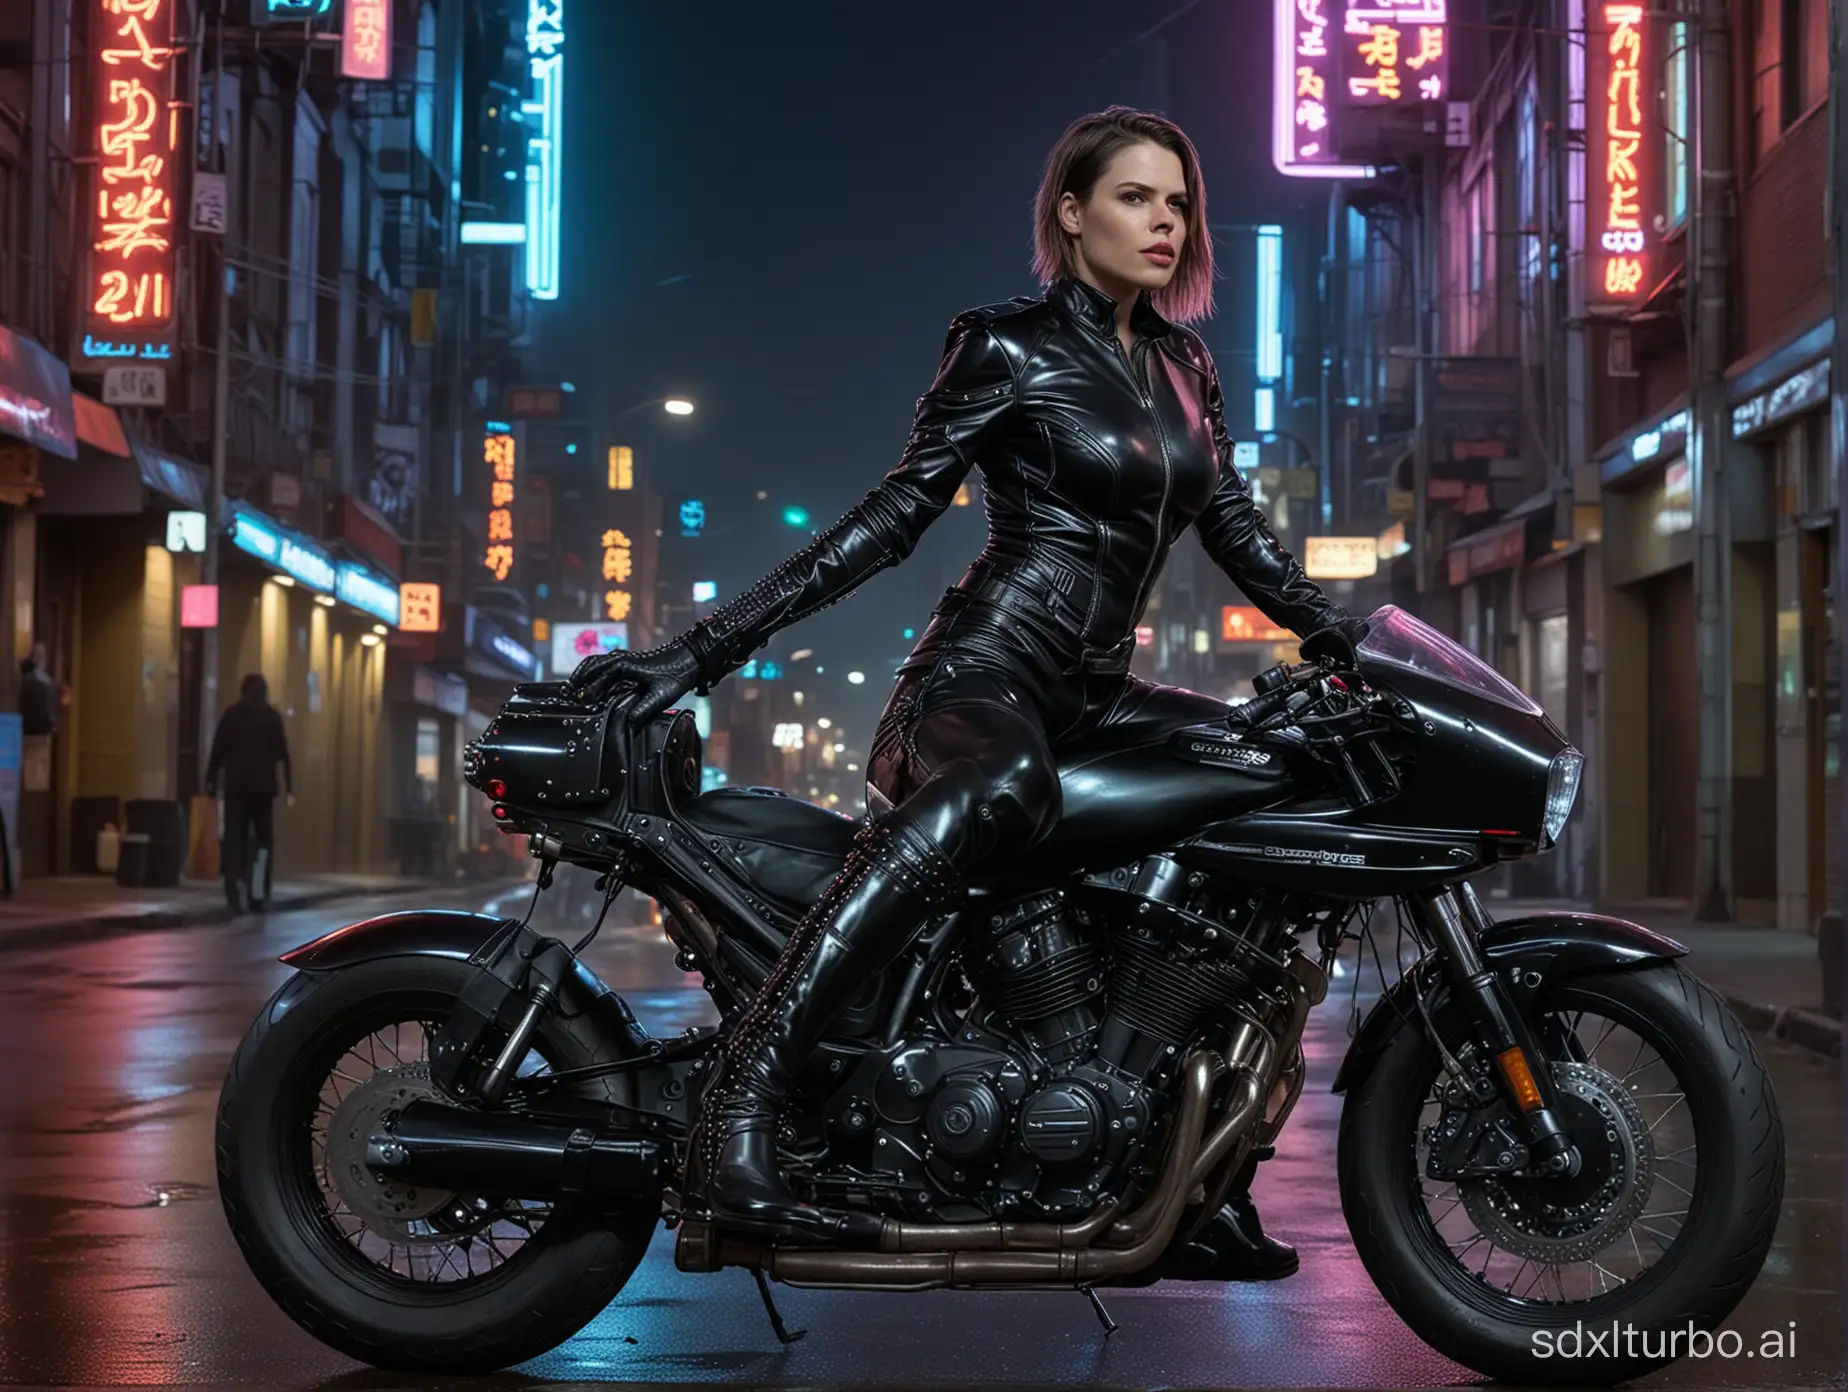 Detailed HD photo, full-length framing, cyberpunk police woman Clea Duvall riding motorbike, wearing black low-cut shiny PVC catsuit, wearing long shiny PVC gloves, wearing shiny PVC thigh-high boots, spikes and studs, in cyberpunk city at night, illuminated by neon